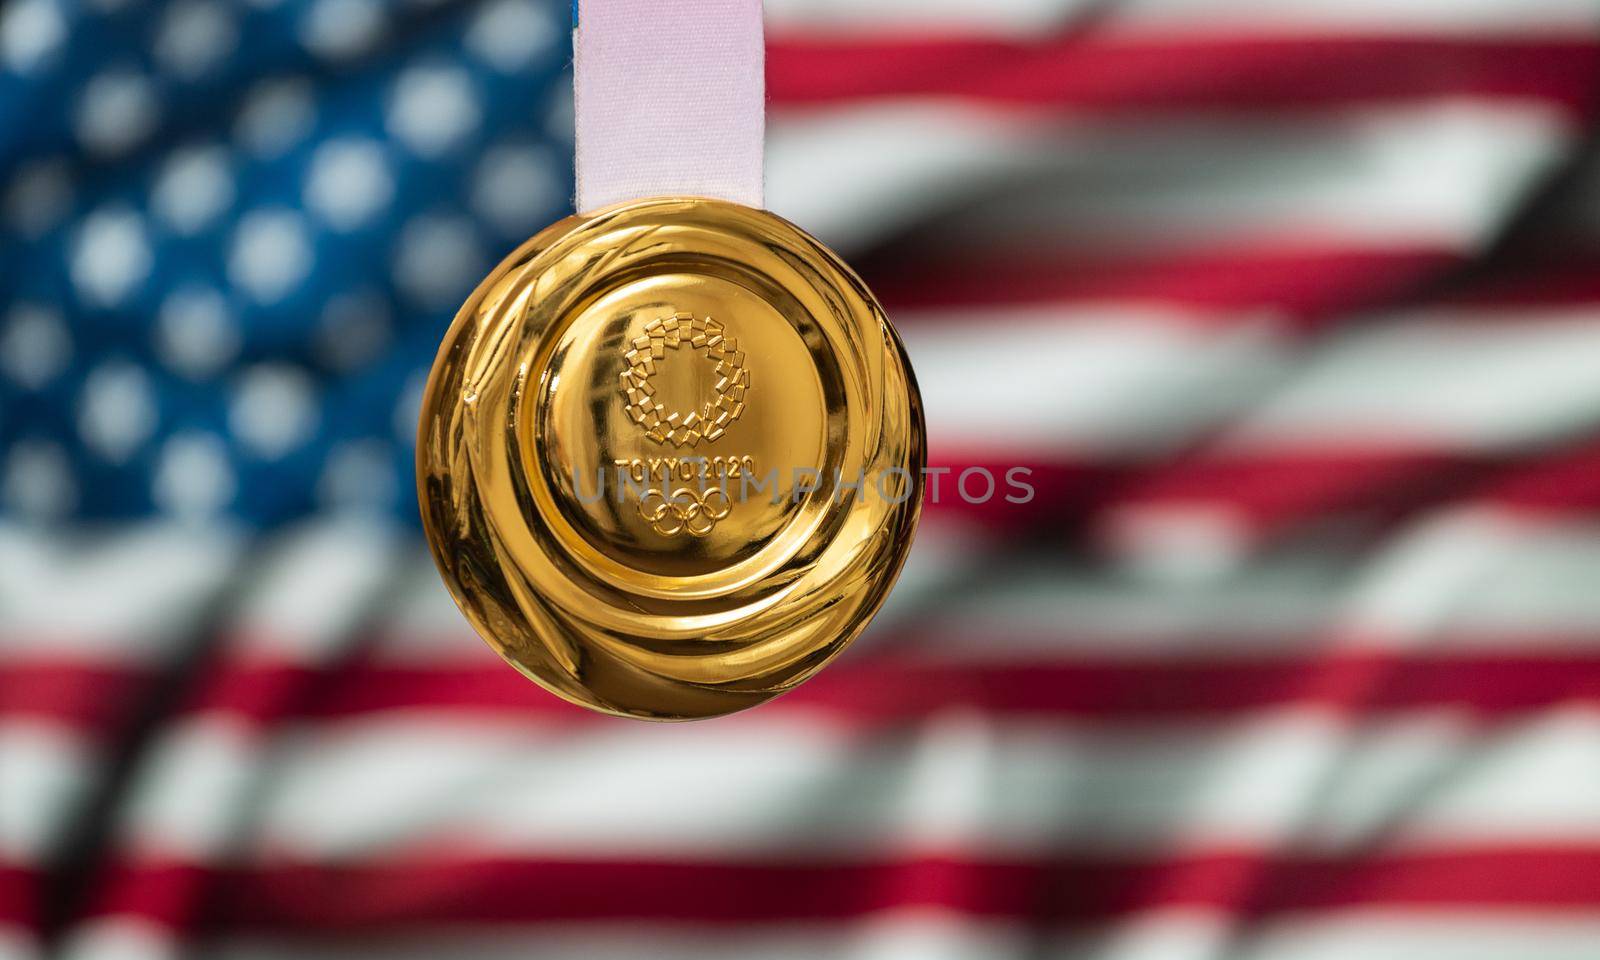 April 25, 2021 Tokyo, Japan. Gold medal of the XXXII Summer Olympic Games 2020 in Tokyo on the background of the US flag.